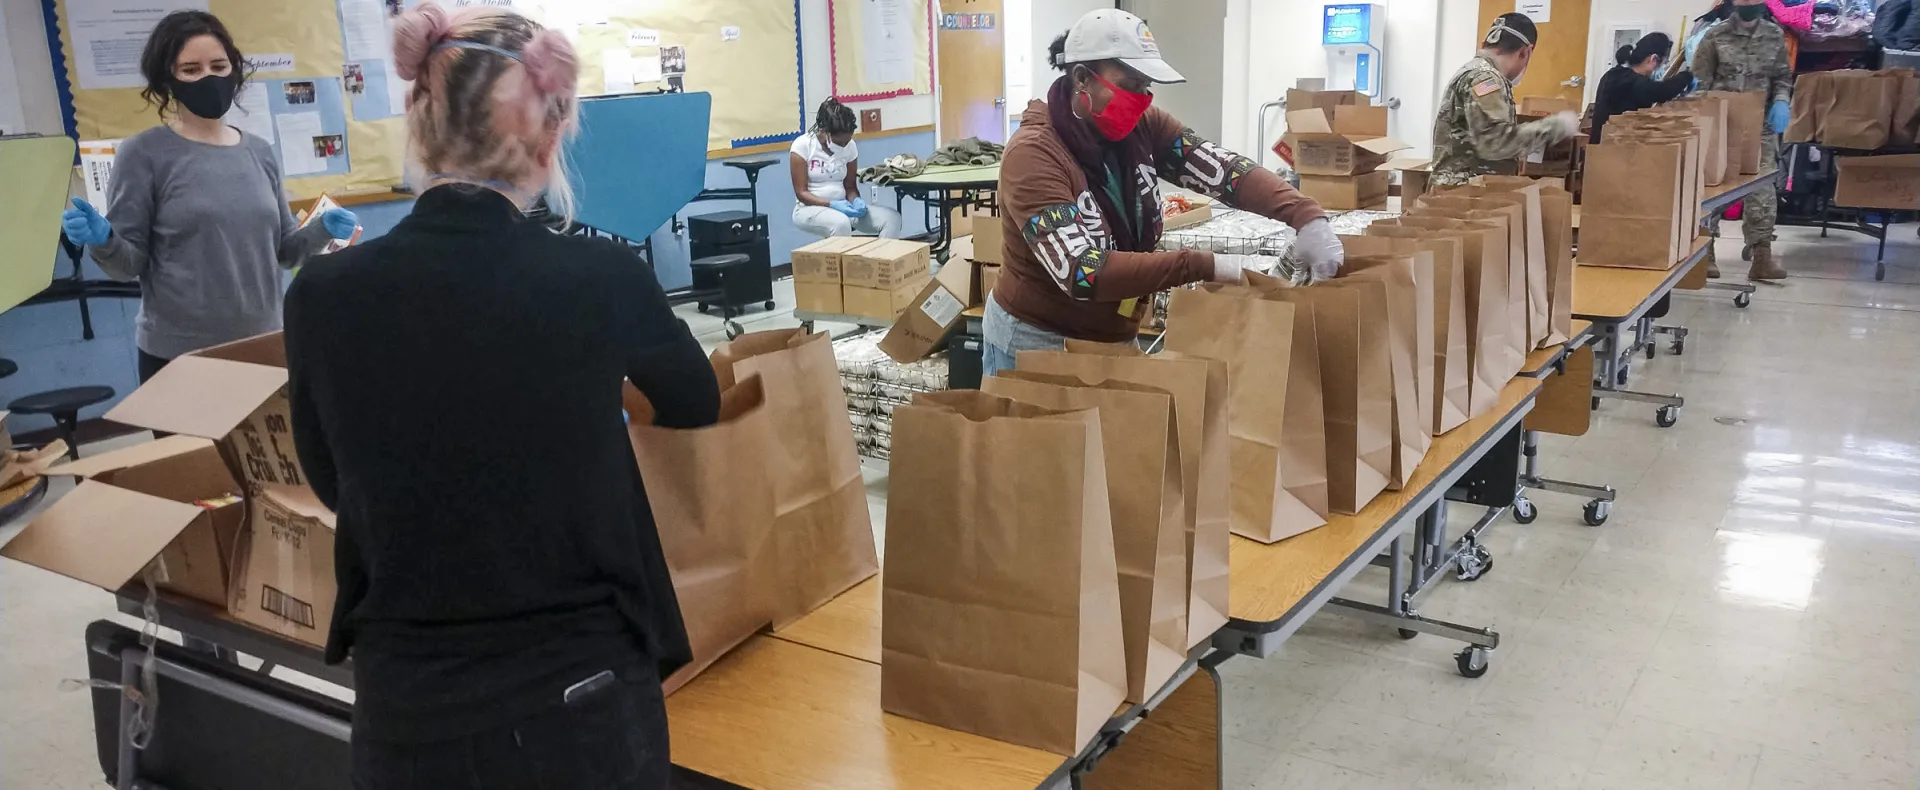 A group packs meals in paper bags on tables in a cafeteria.